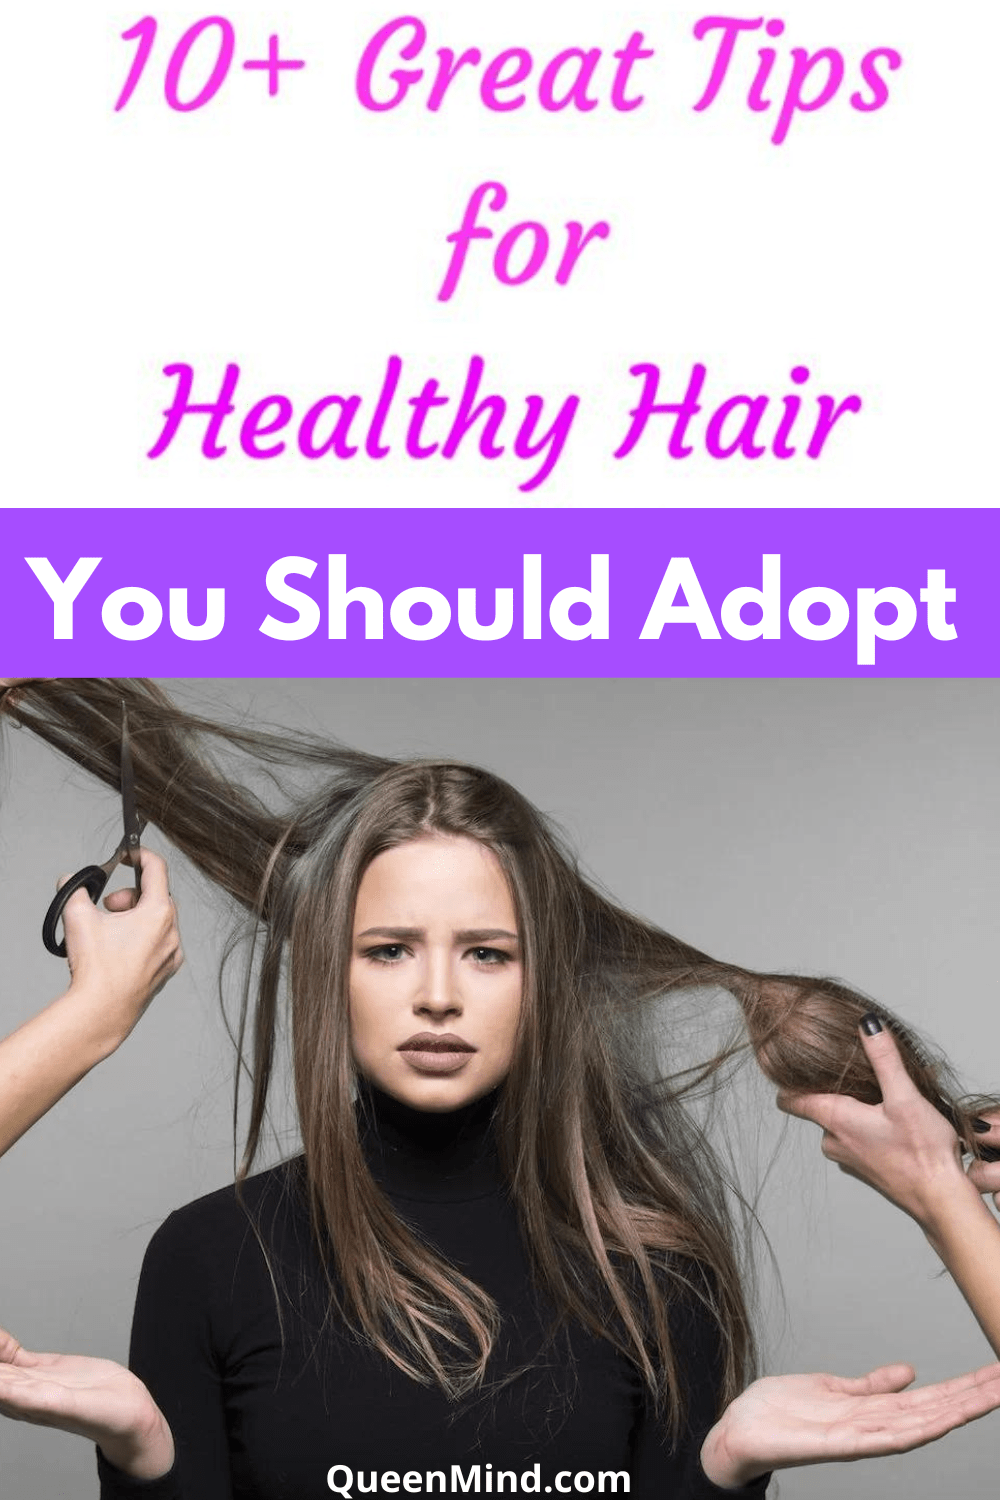 Top 10 Great Habits For Healthy Hair You Should Adopt -